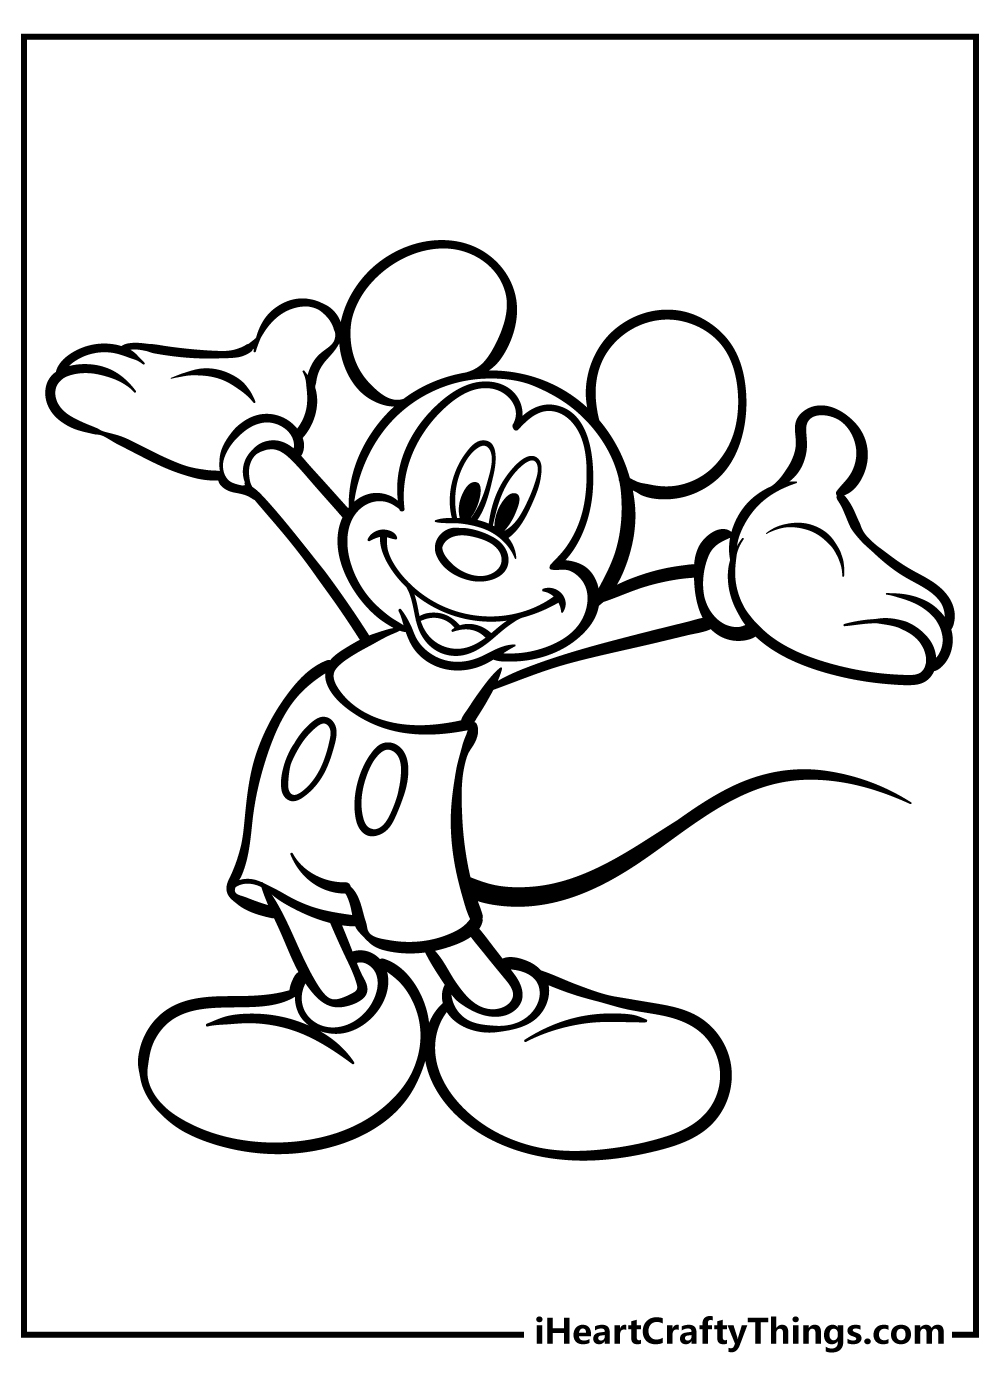 Printable Mickey Mouse Coloring Pages Updated 21